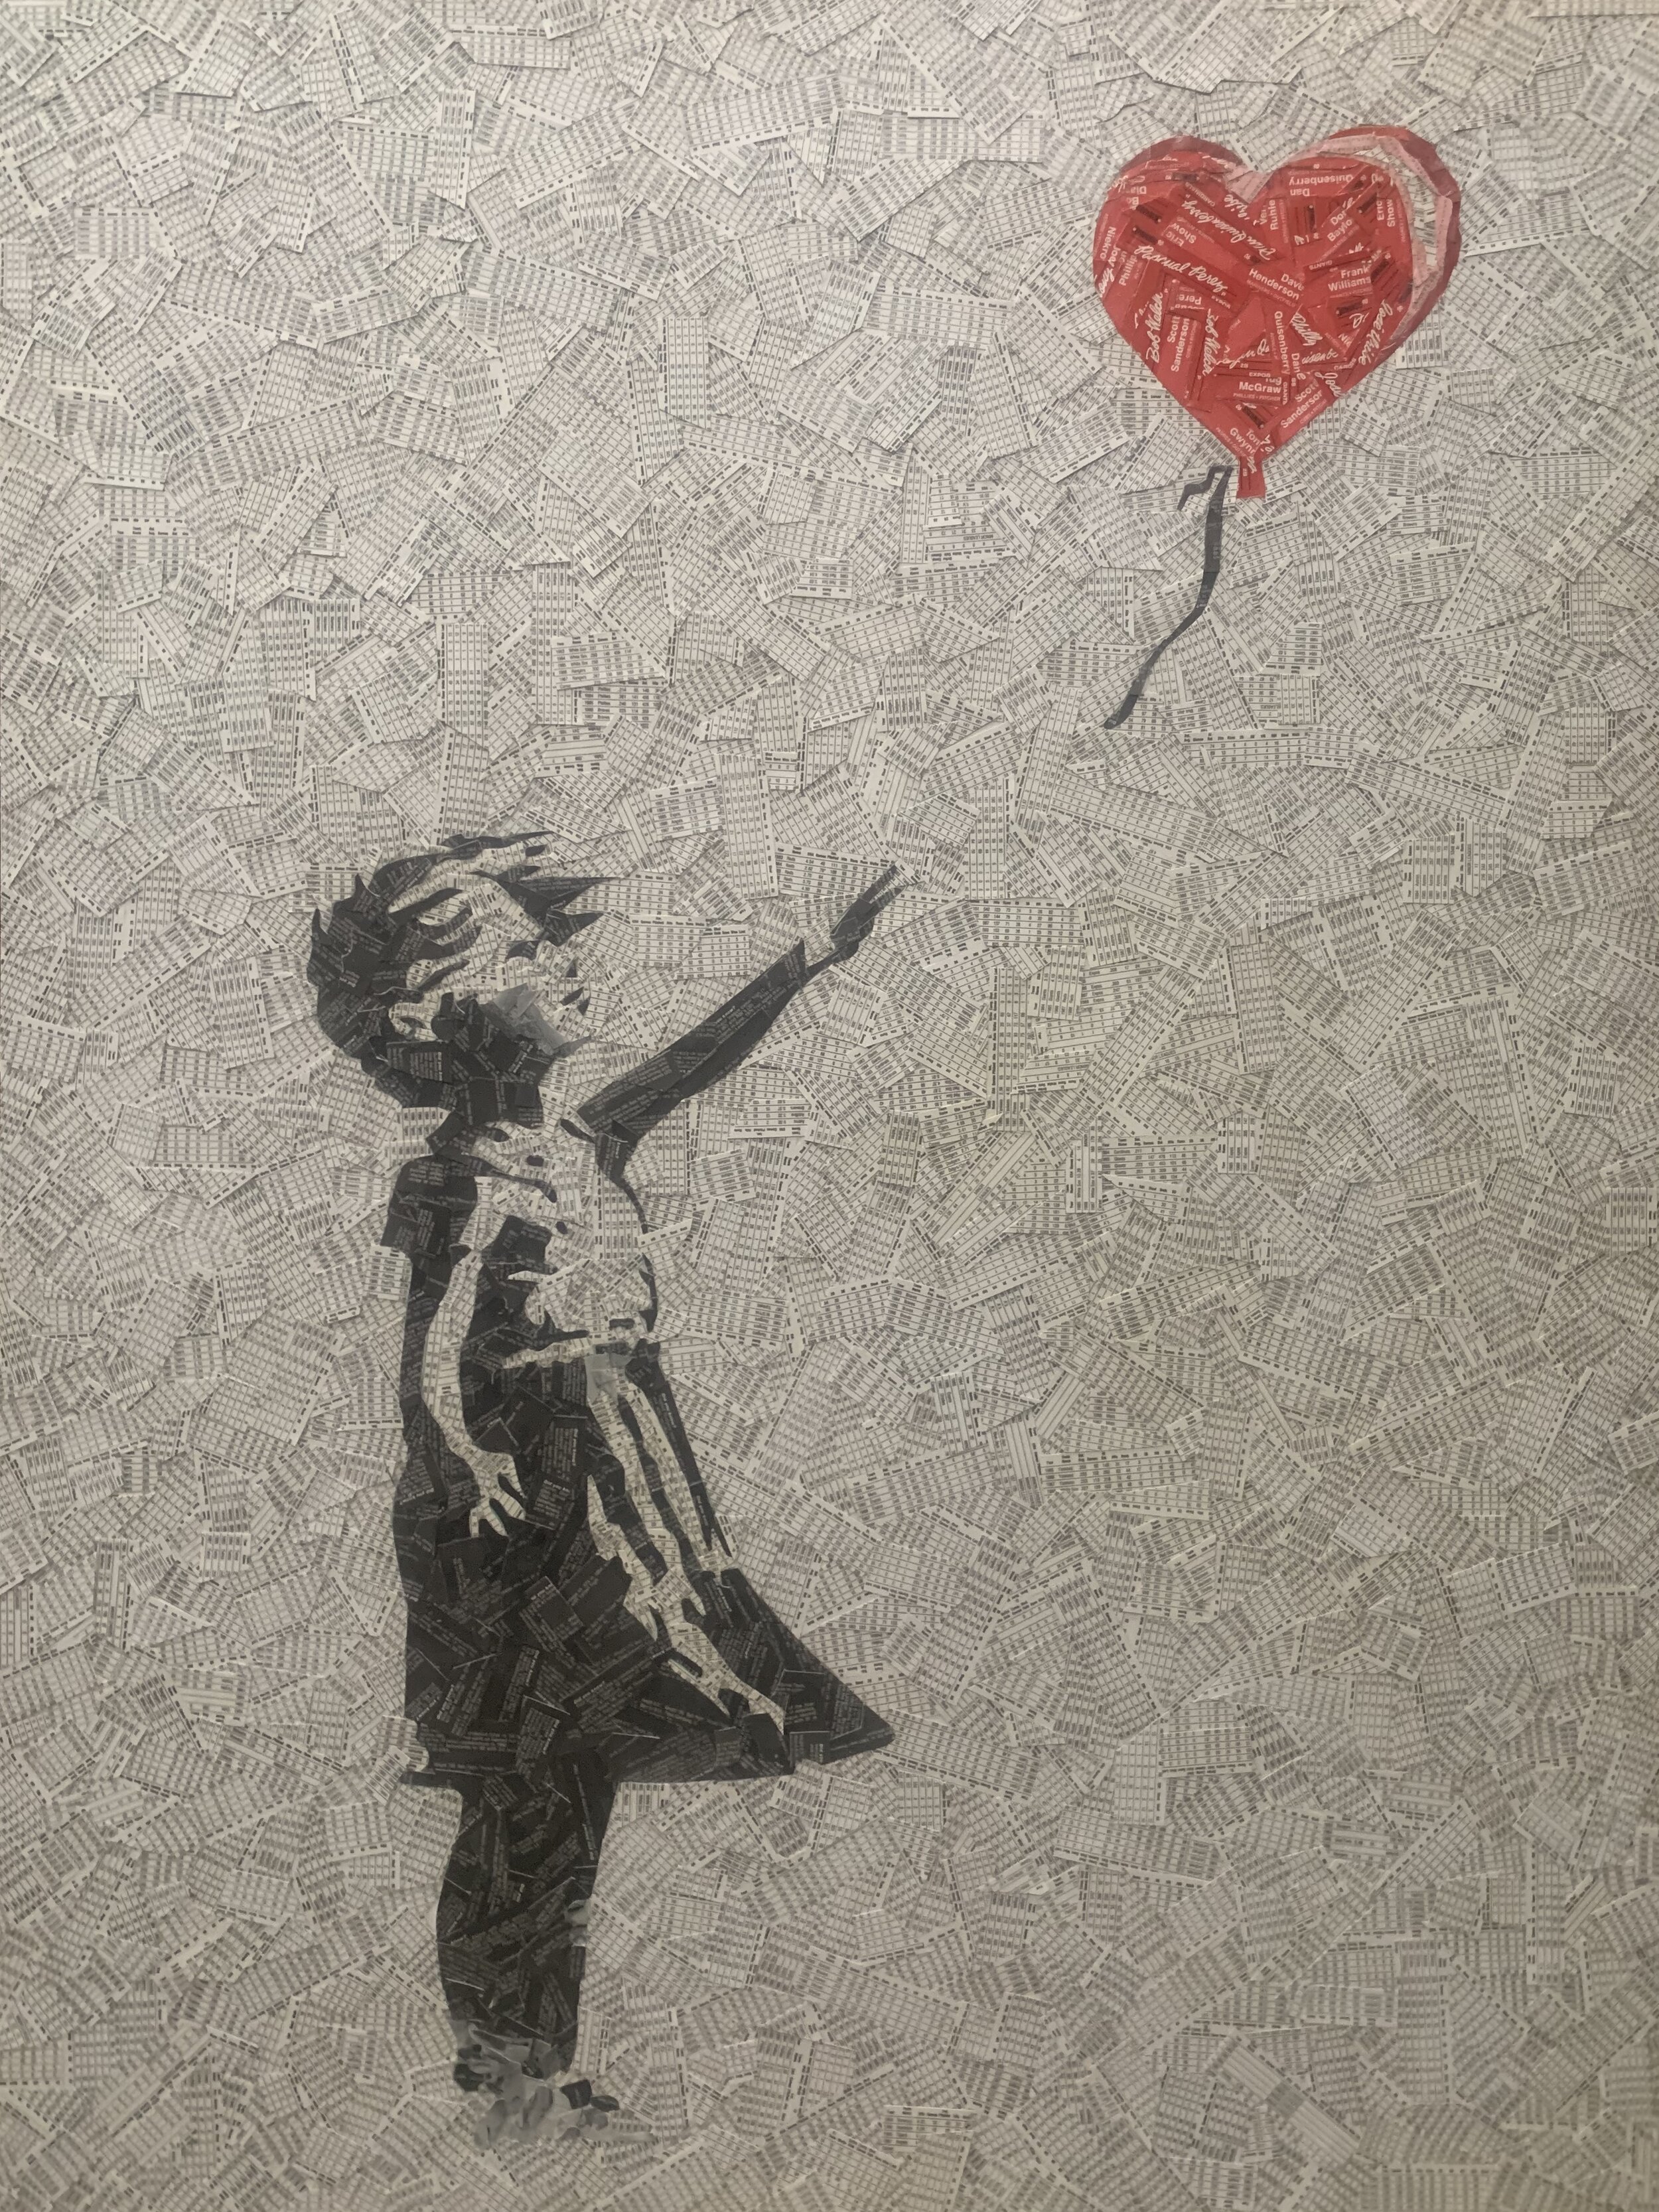 "Banksy's Girl with Balloon"